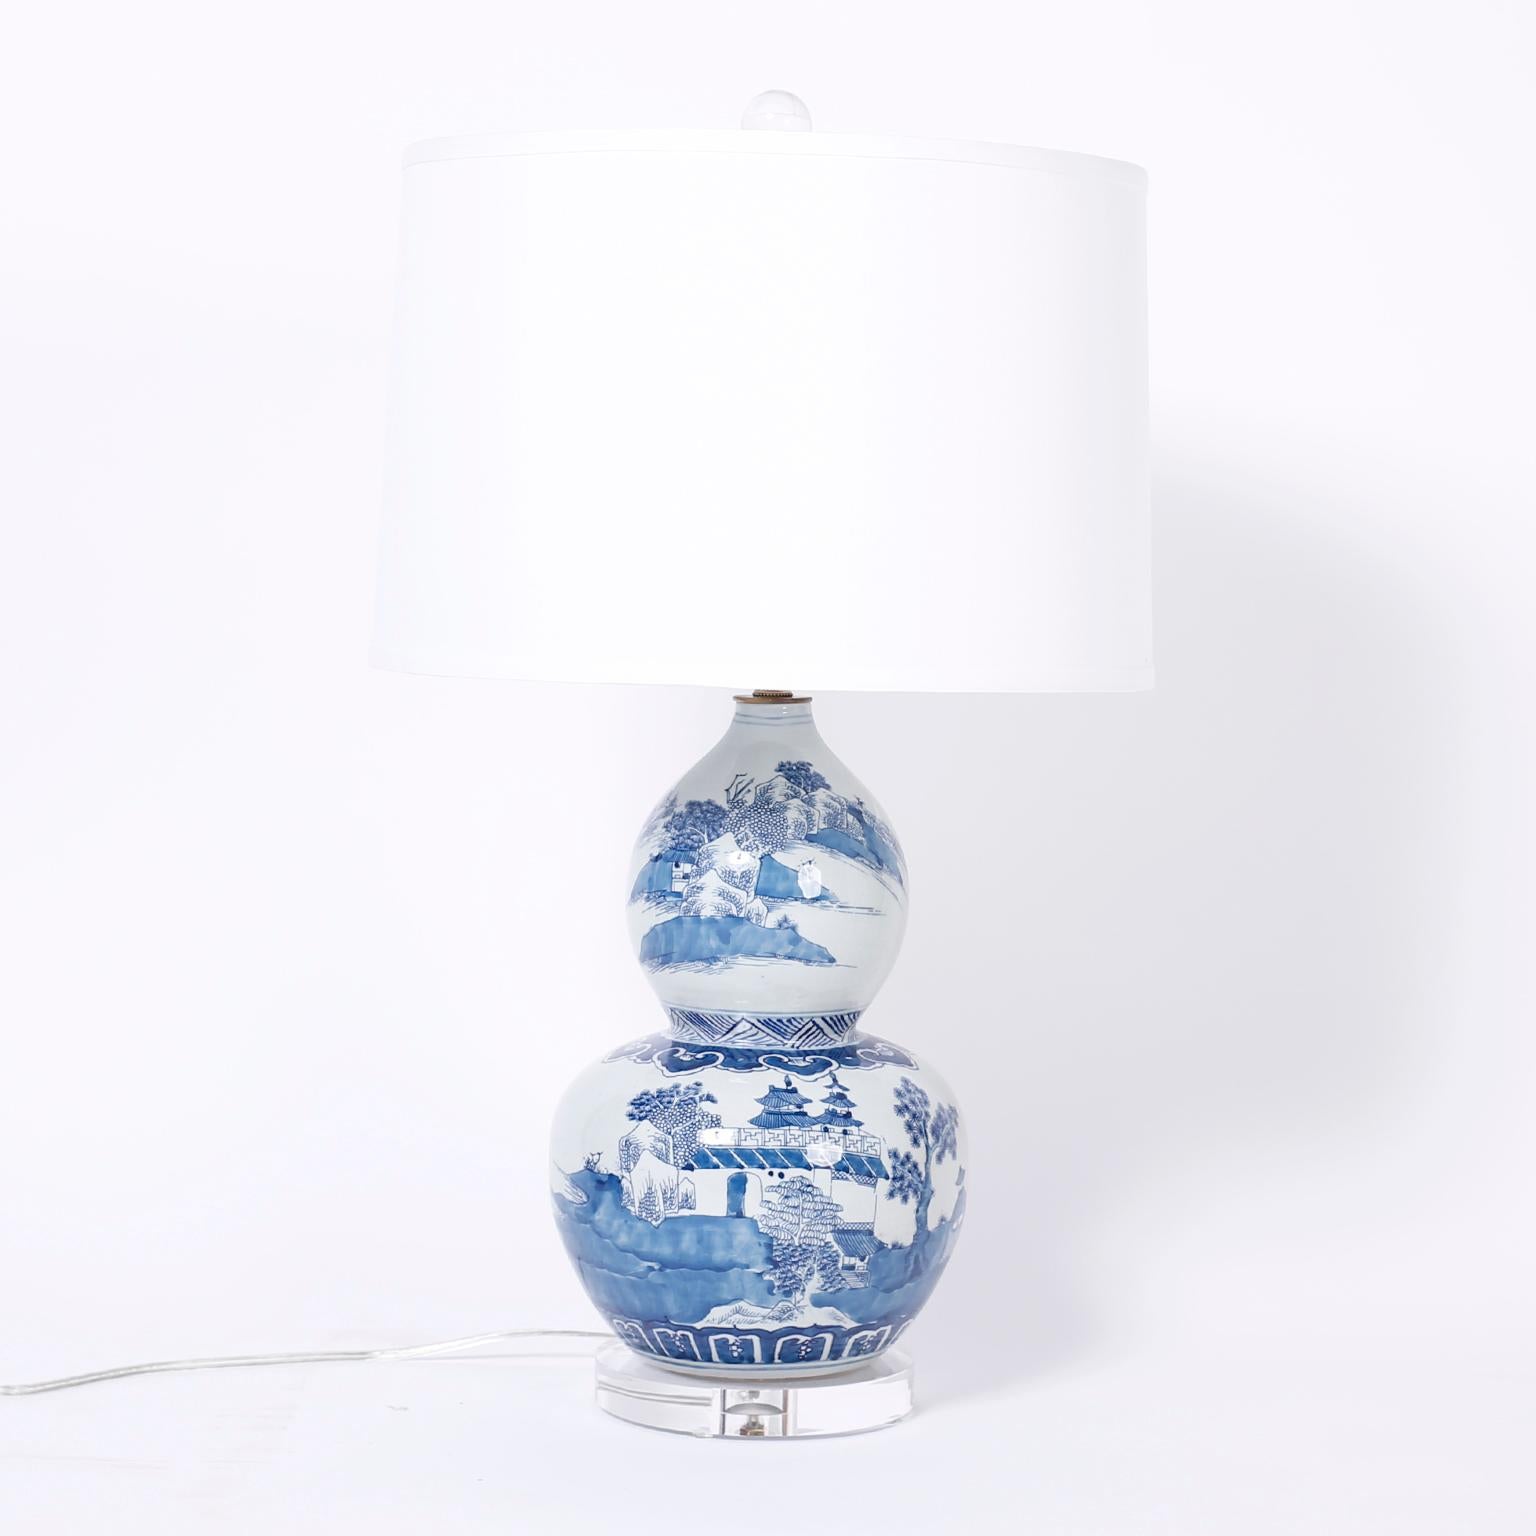 Dynamic pair of Chinese blue and white porcelain table lamps with a Classic double gourd form, hand decorated with architectural landscape and presented on Lucite bases.